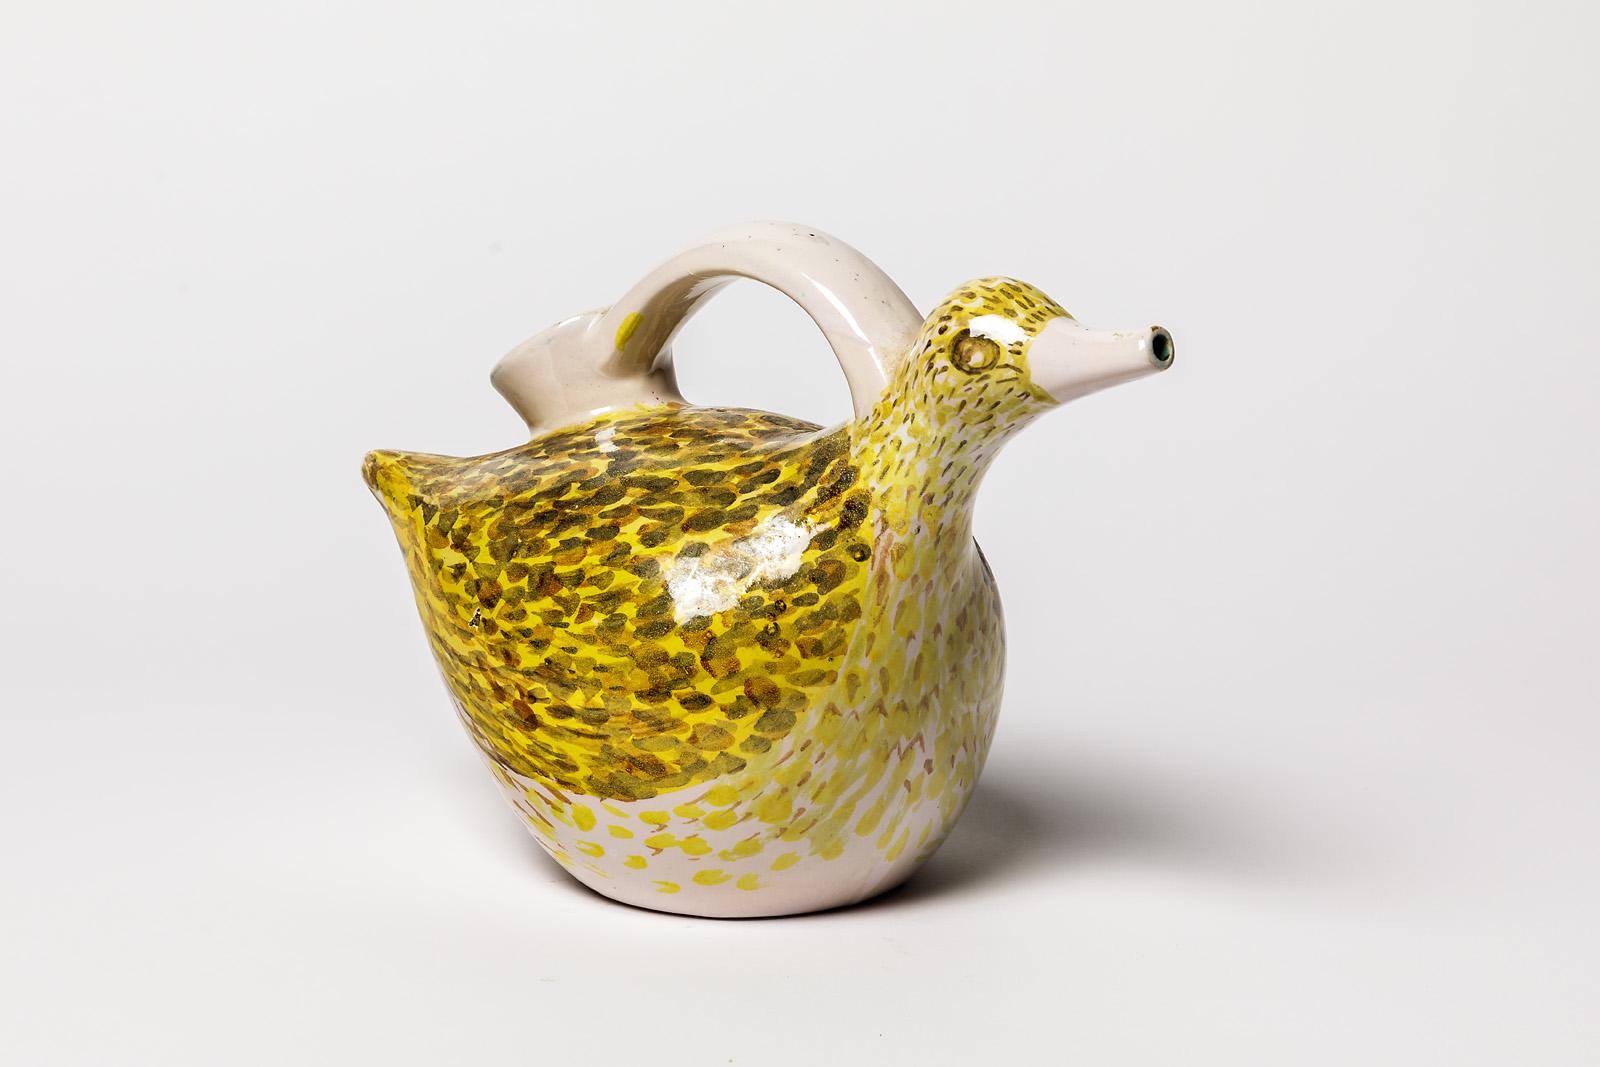 XXth Century White and Yellow Ceramic Bird Pitcher by Pierre Roulot 1951 For Sale 1